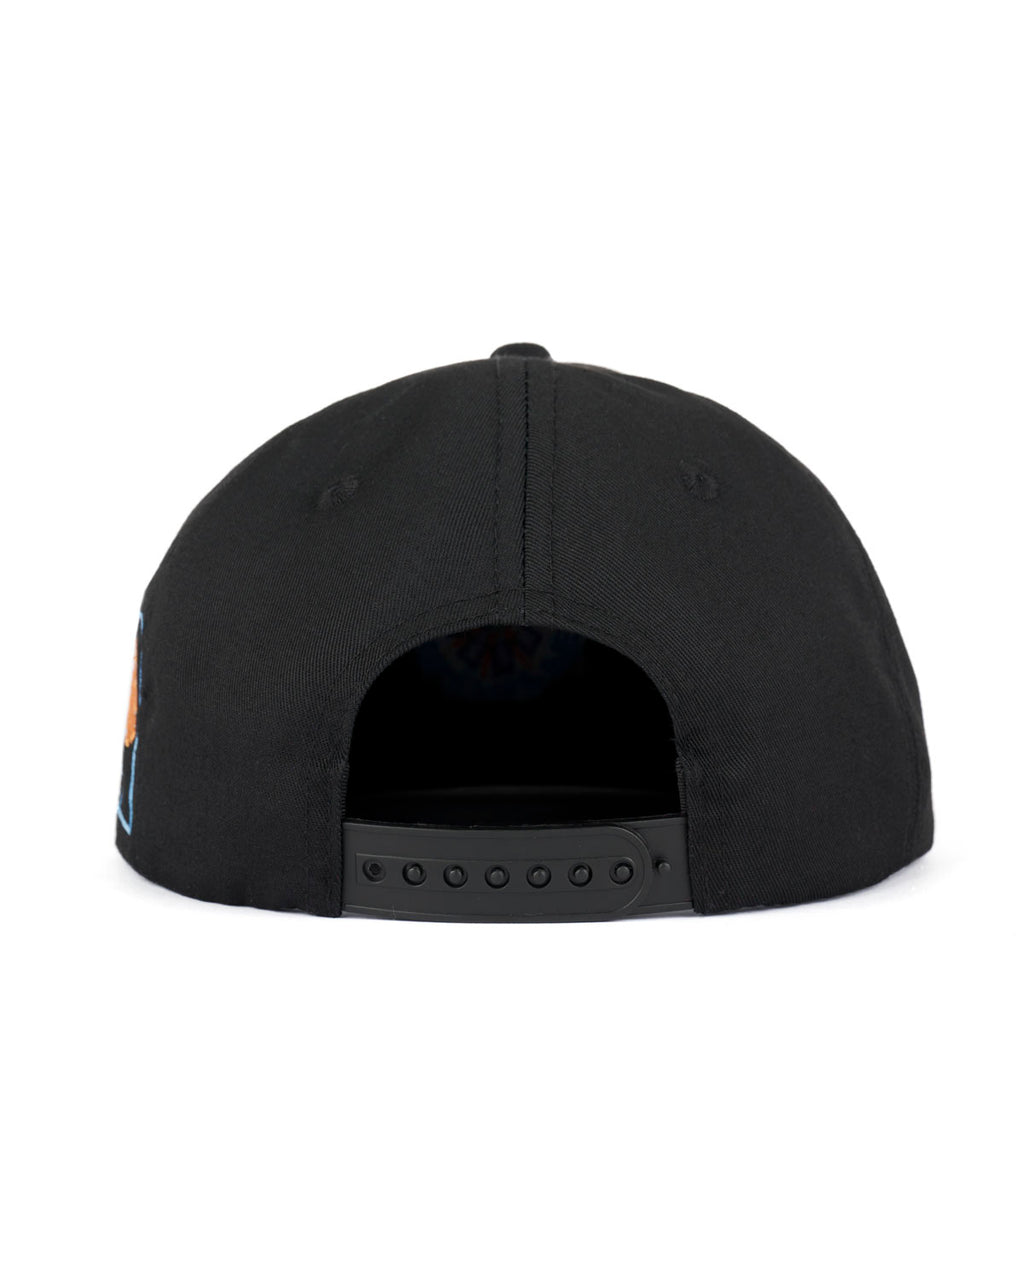 Brain Dead x Red Hot Chili Peppers Hat - Black 3